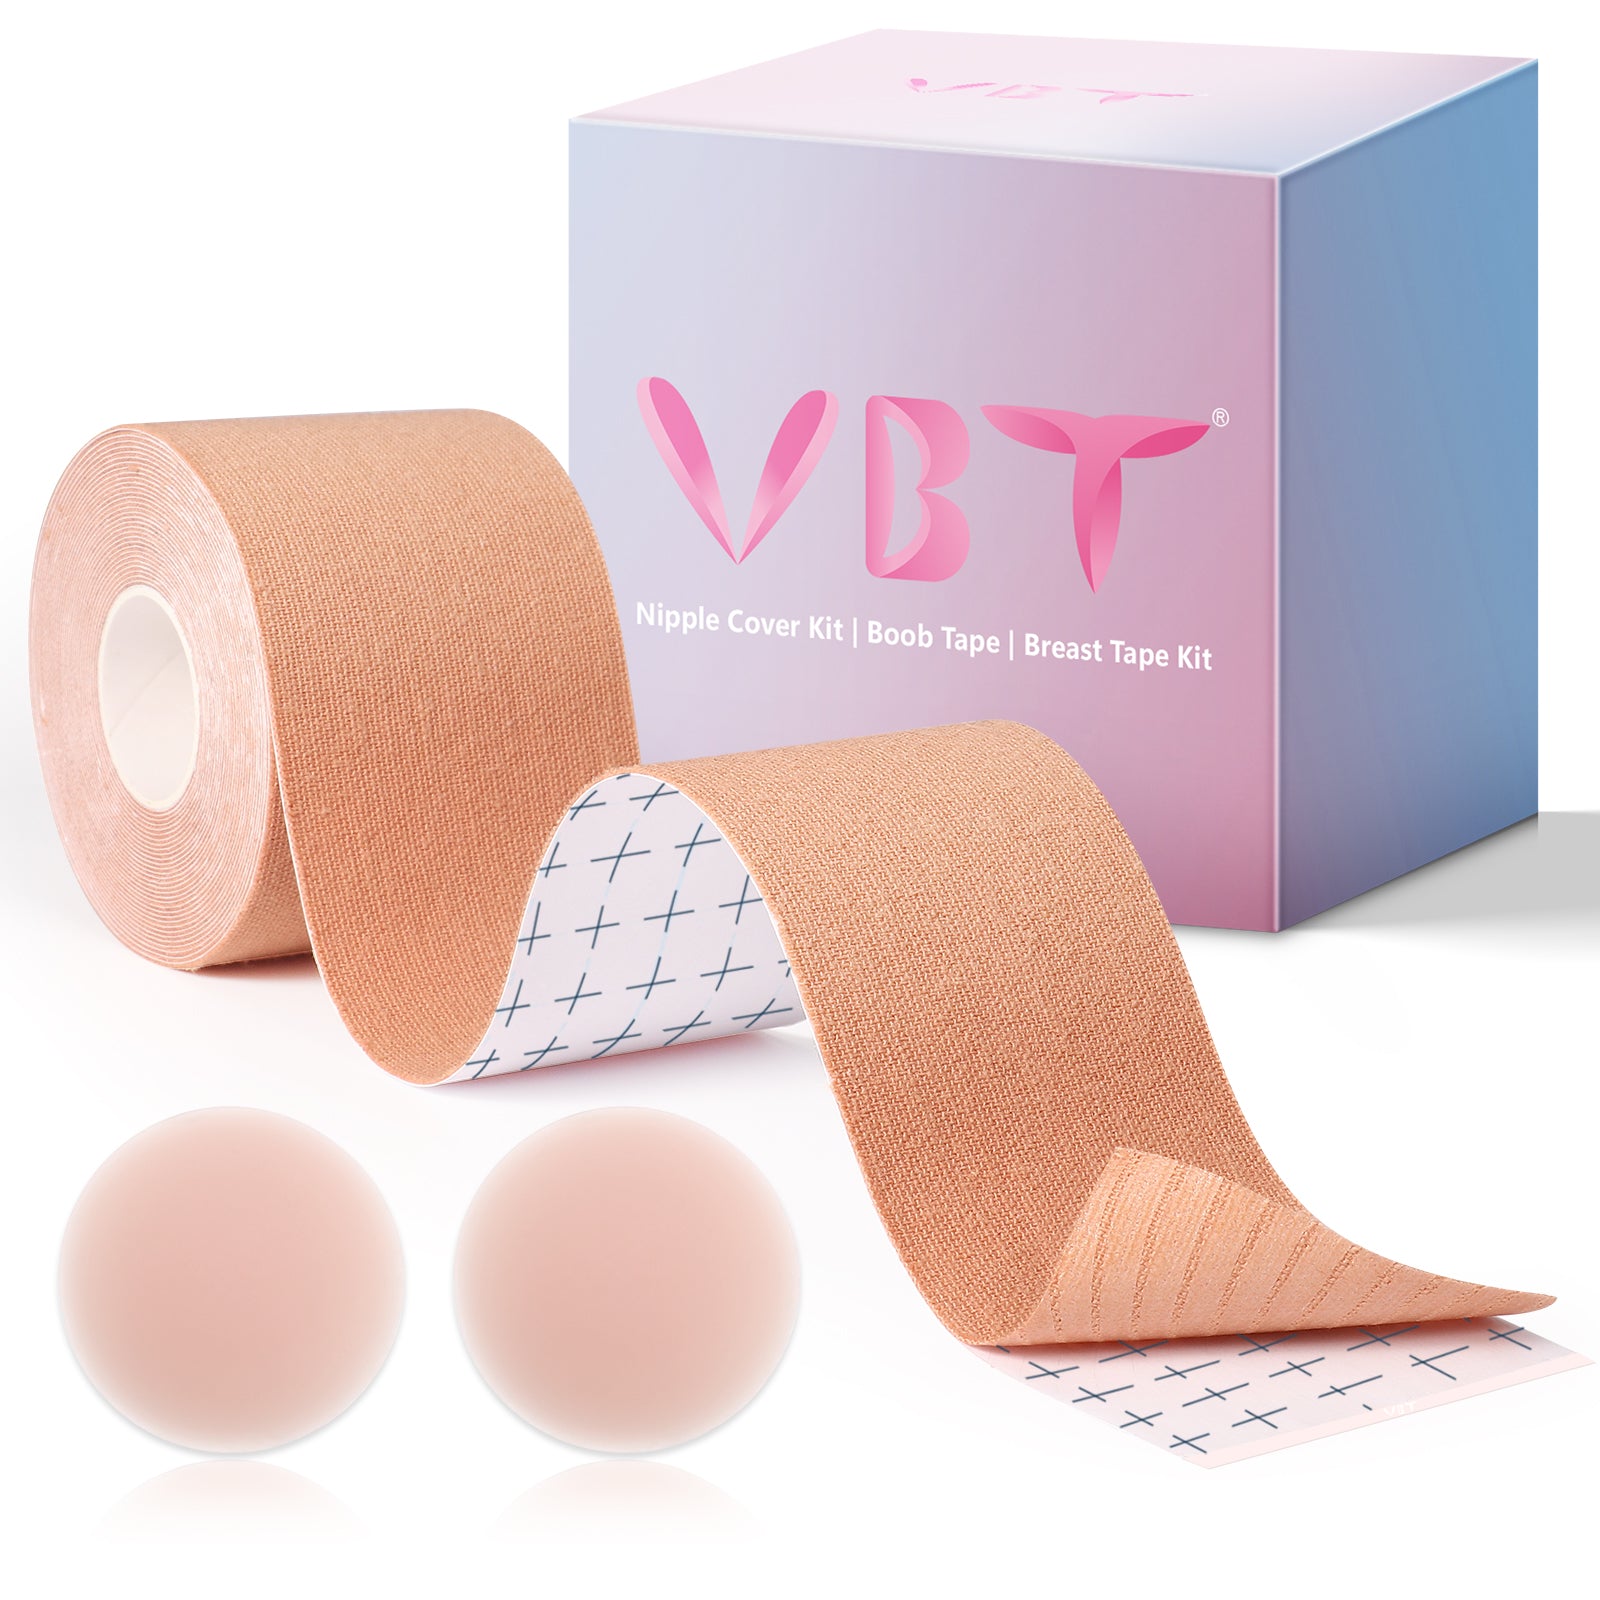 HOW TO: BOOBTAPE, VBT Boob Tape, Demo